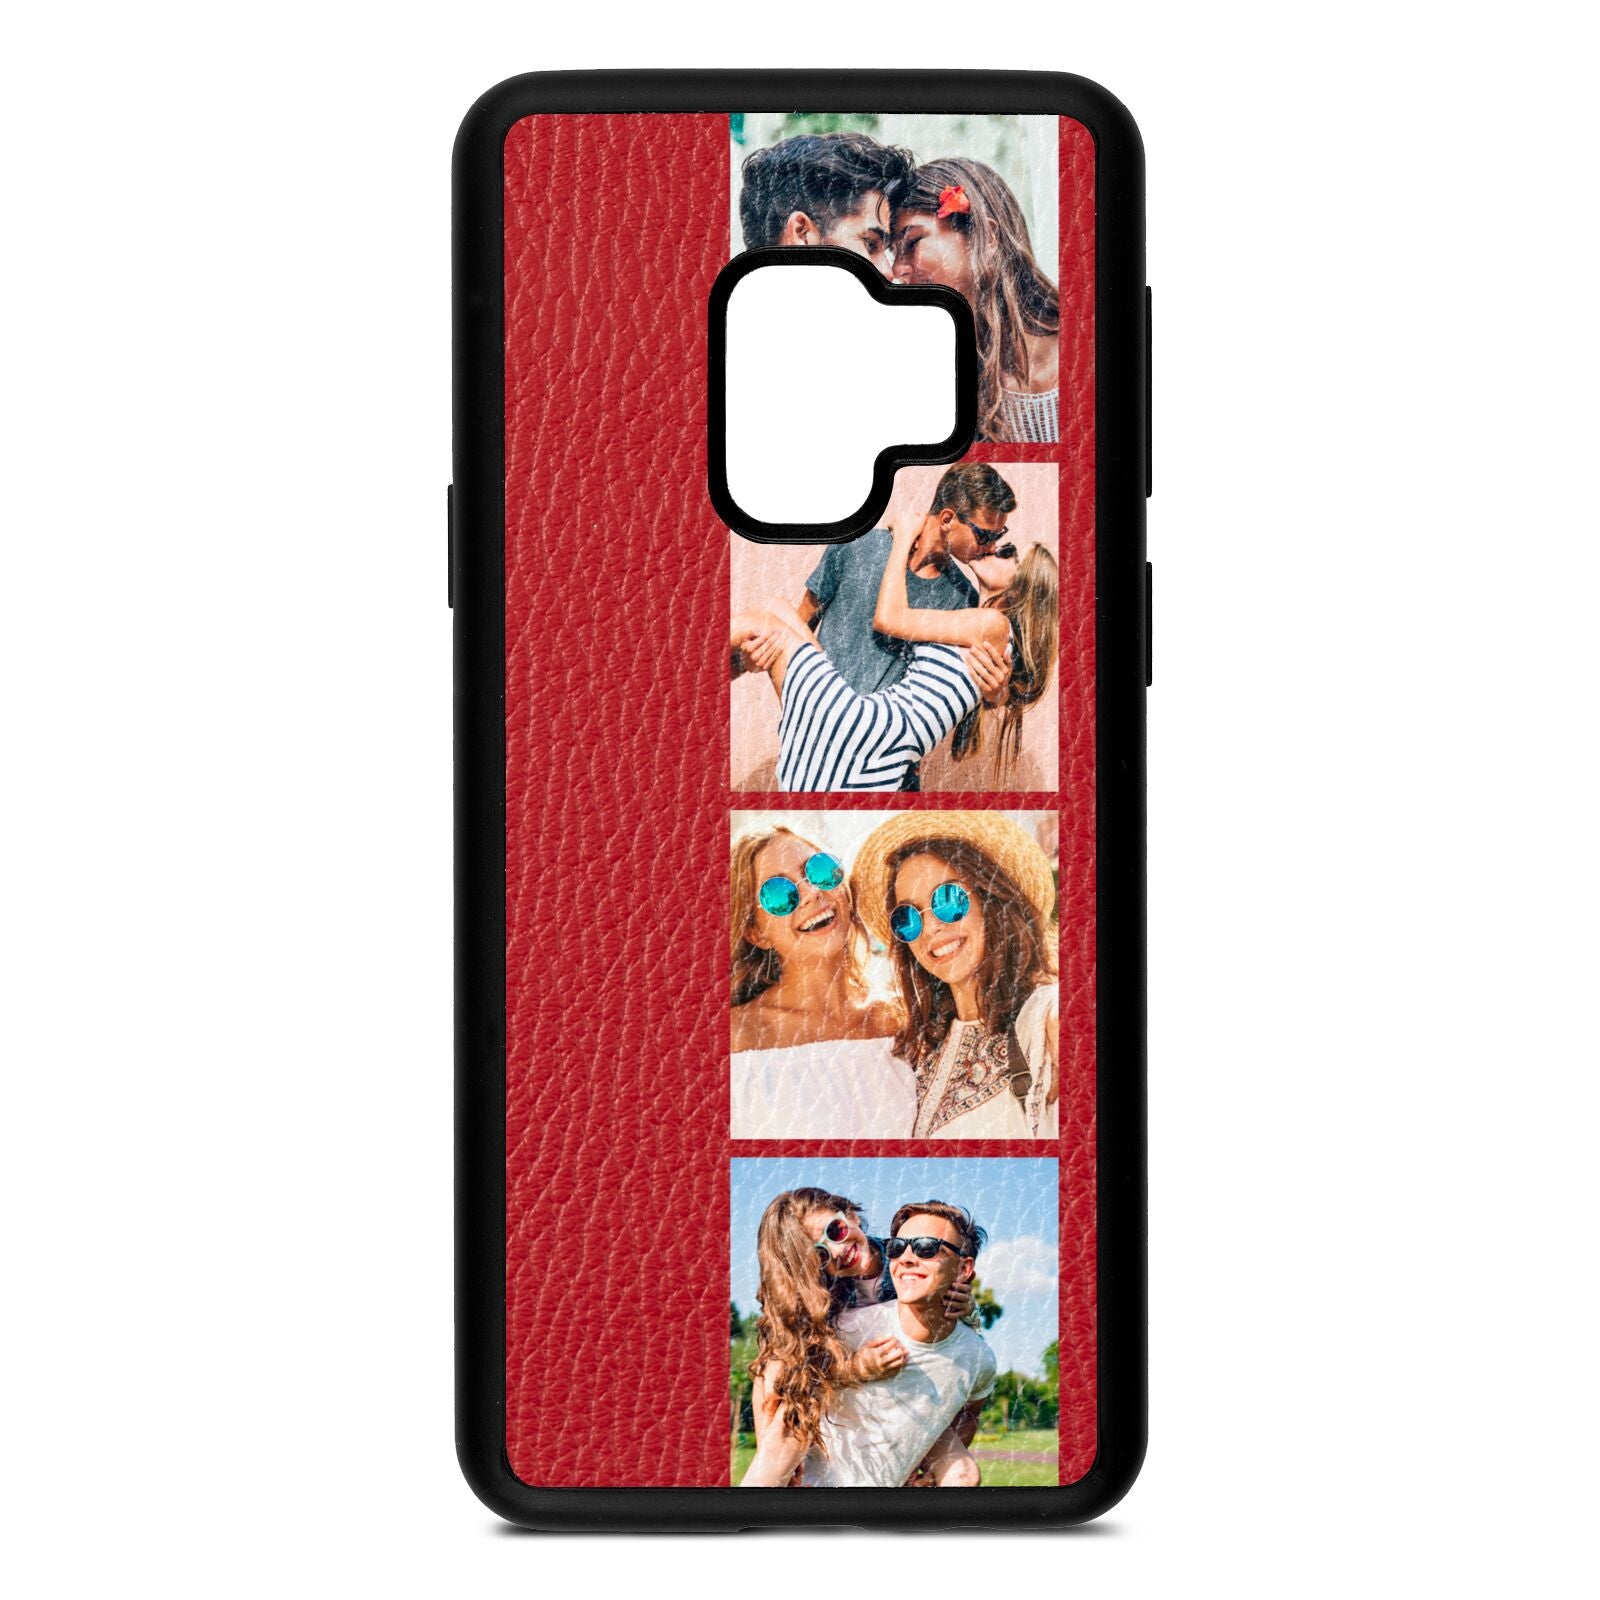 Photo Strip Montage Upload Red Pebble Leather Samsung S9 Case